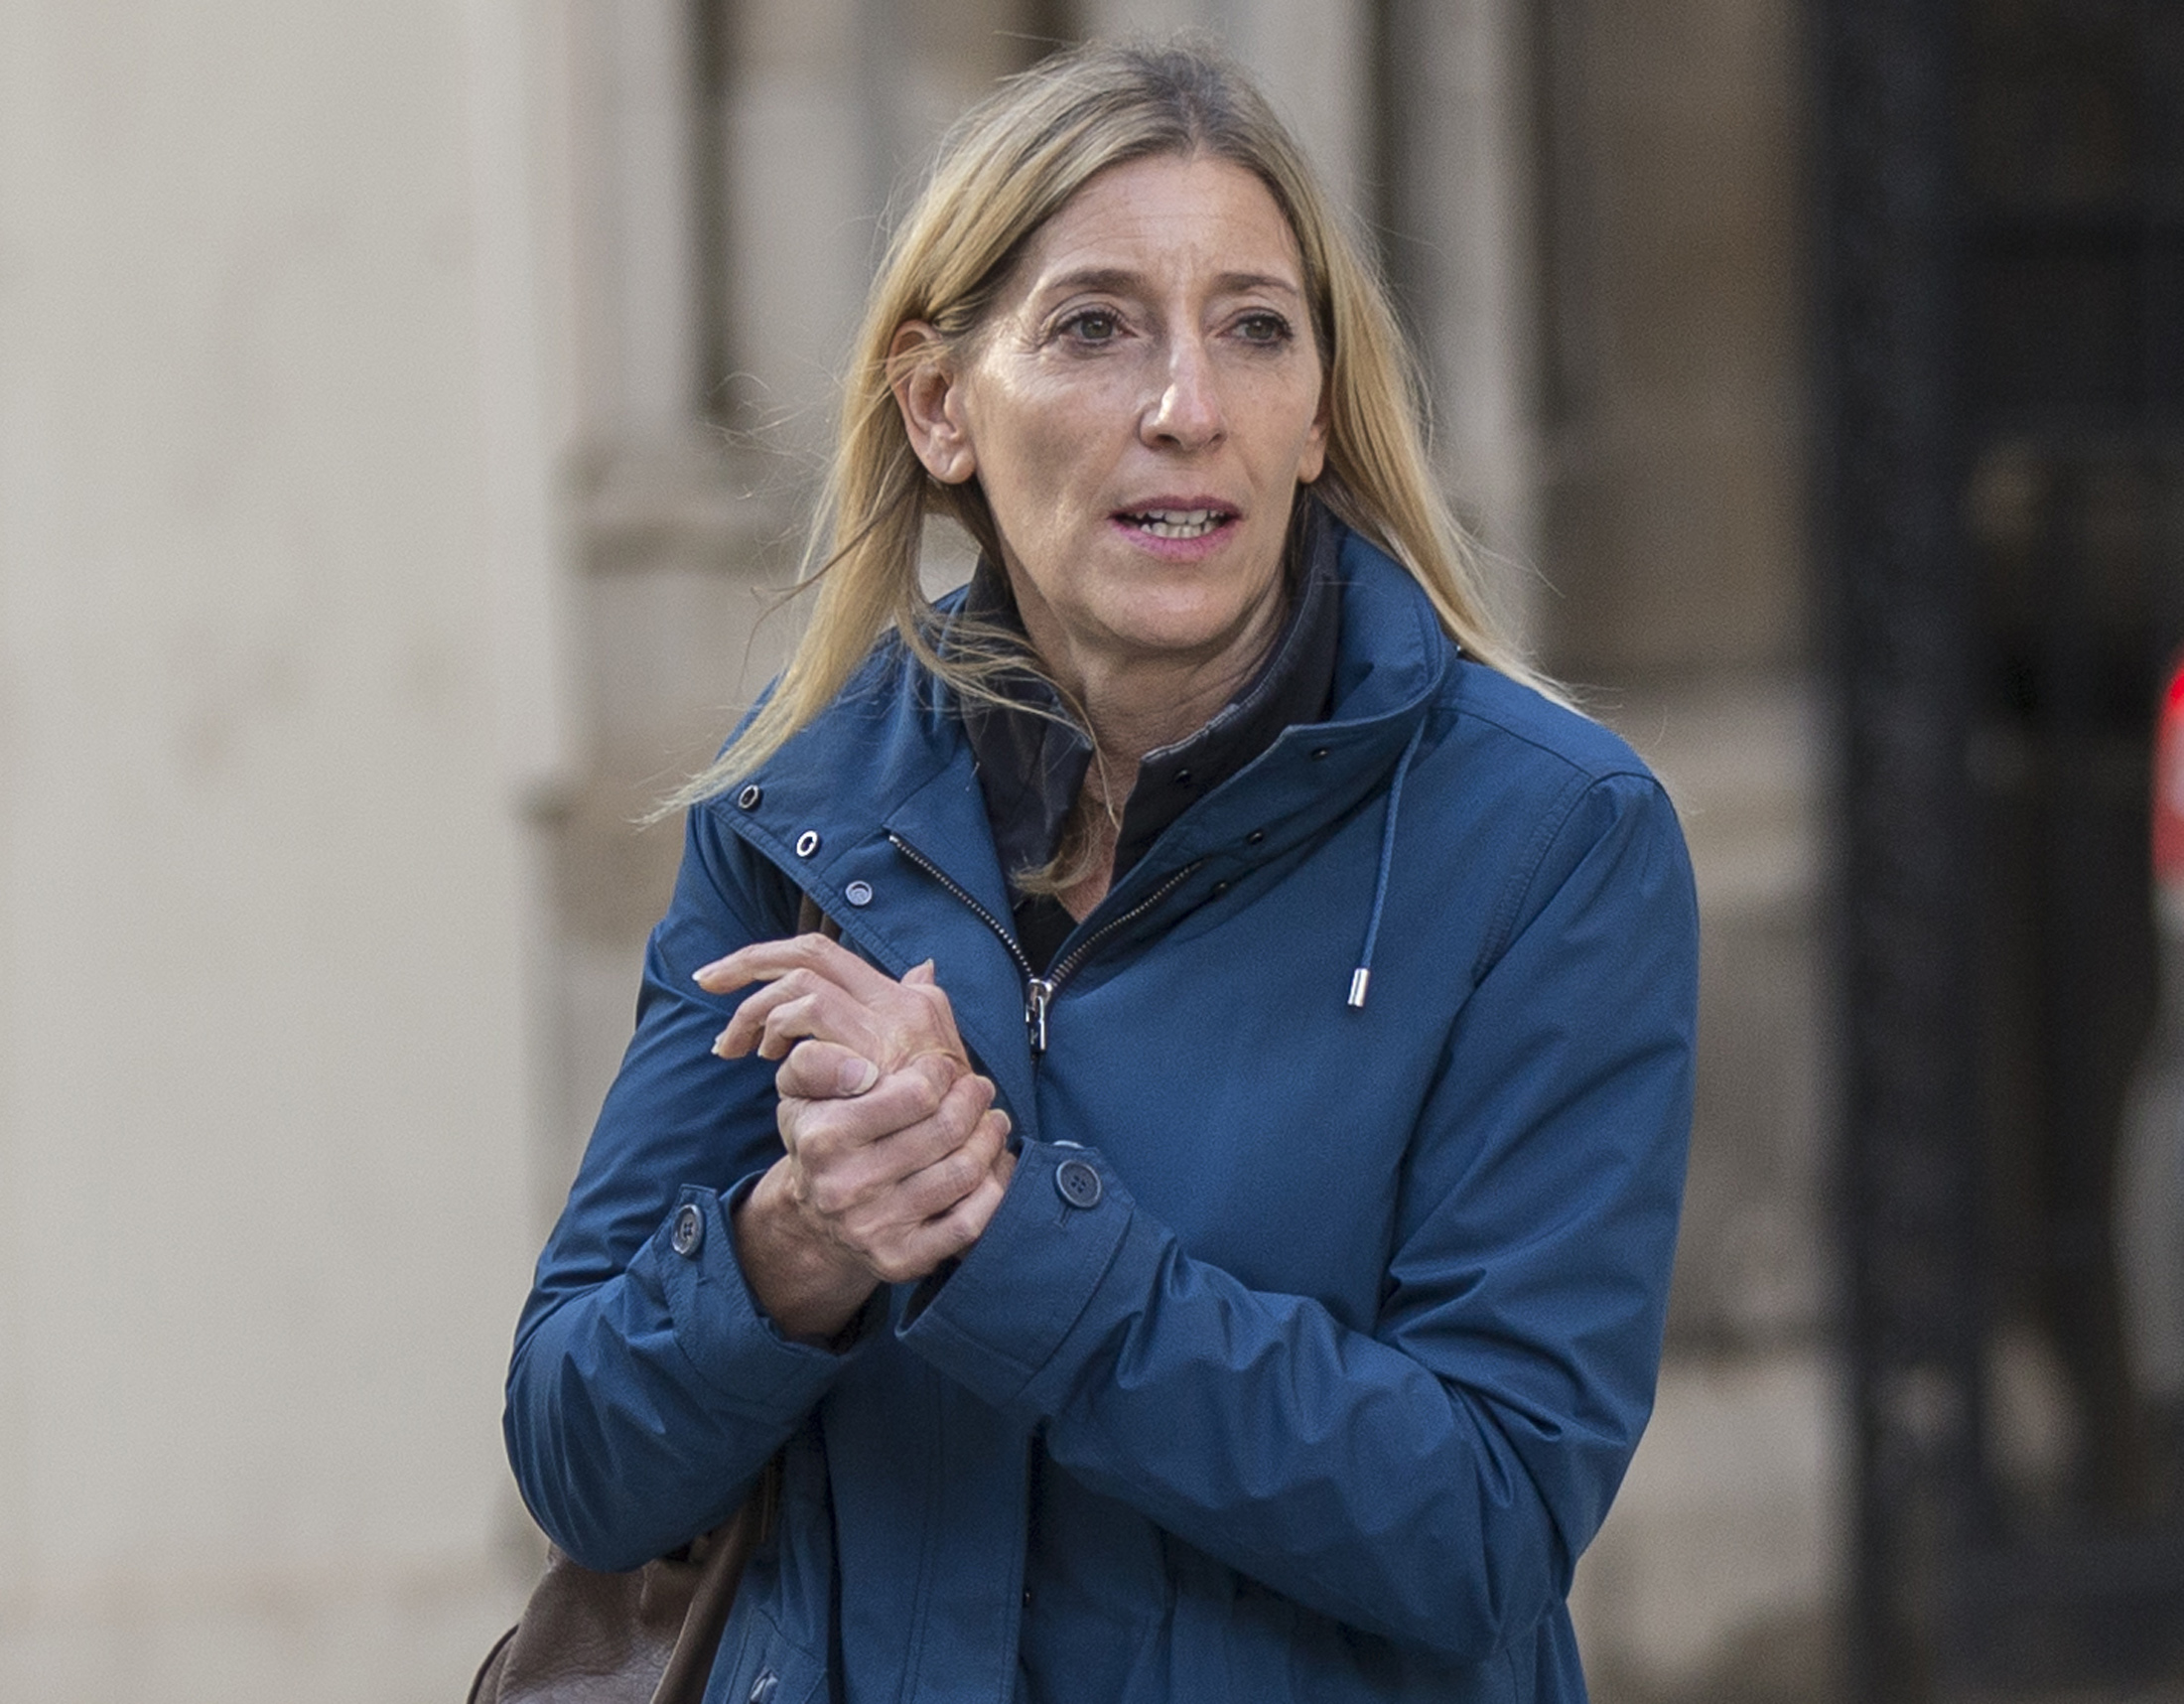 Jamie Cooper-Hohn, wife of top hedge fund boss Chris Hohn, leaves the High Court after a divorce hearing, in central London